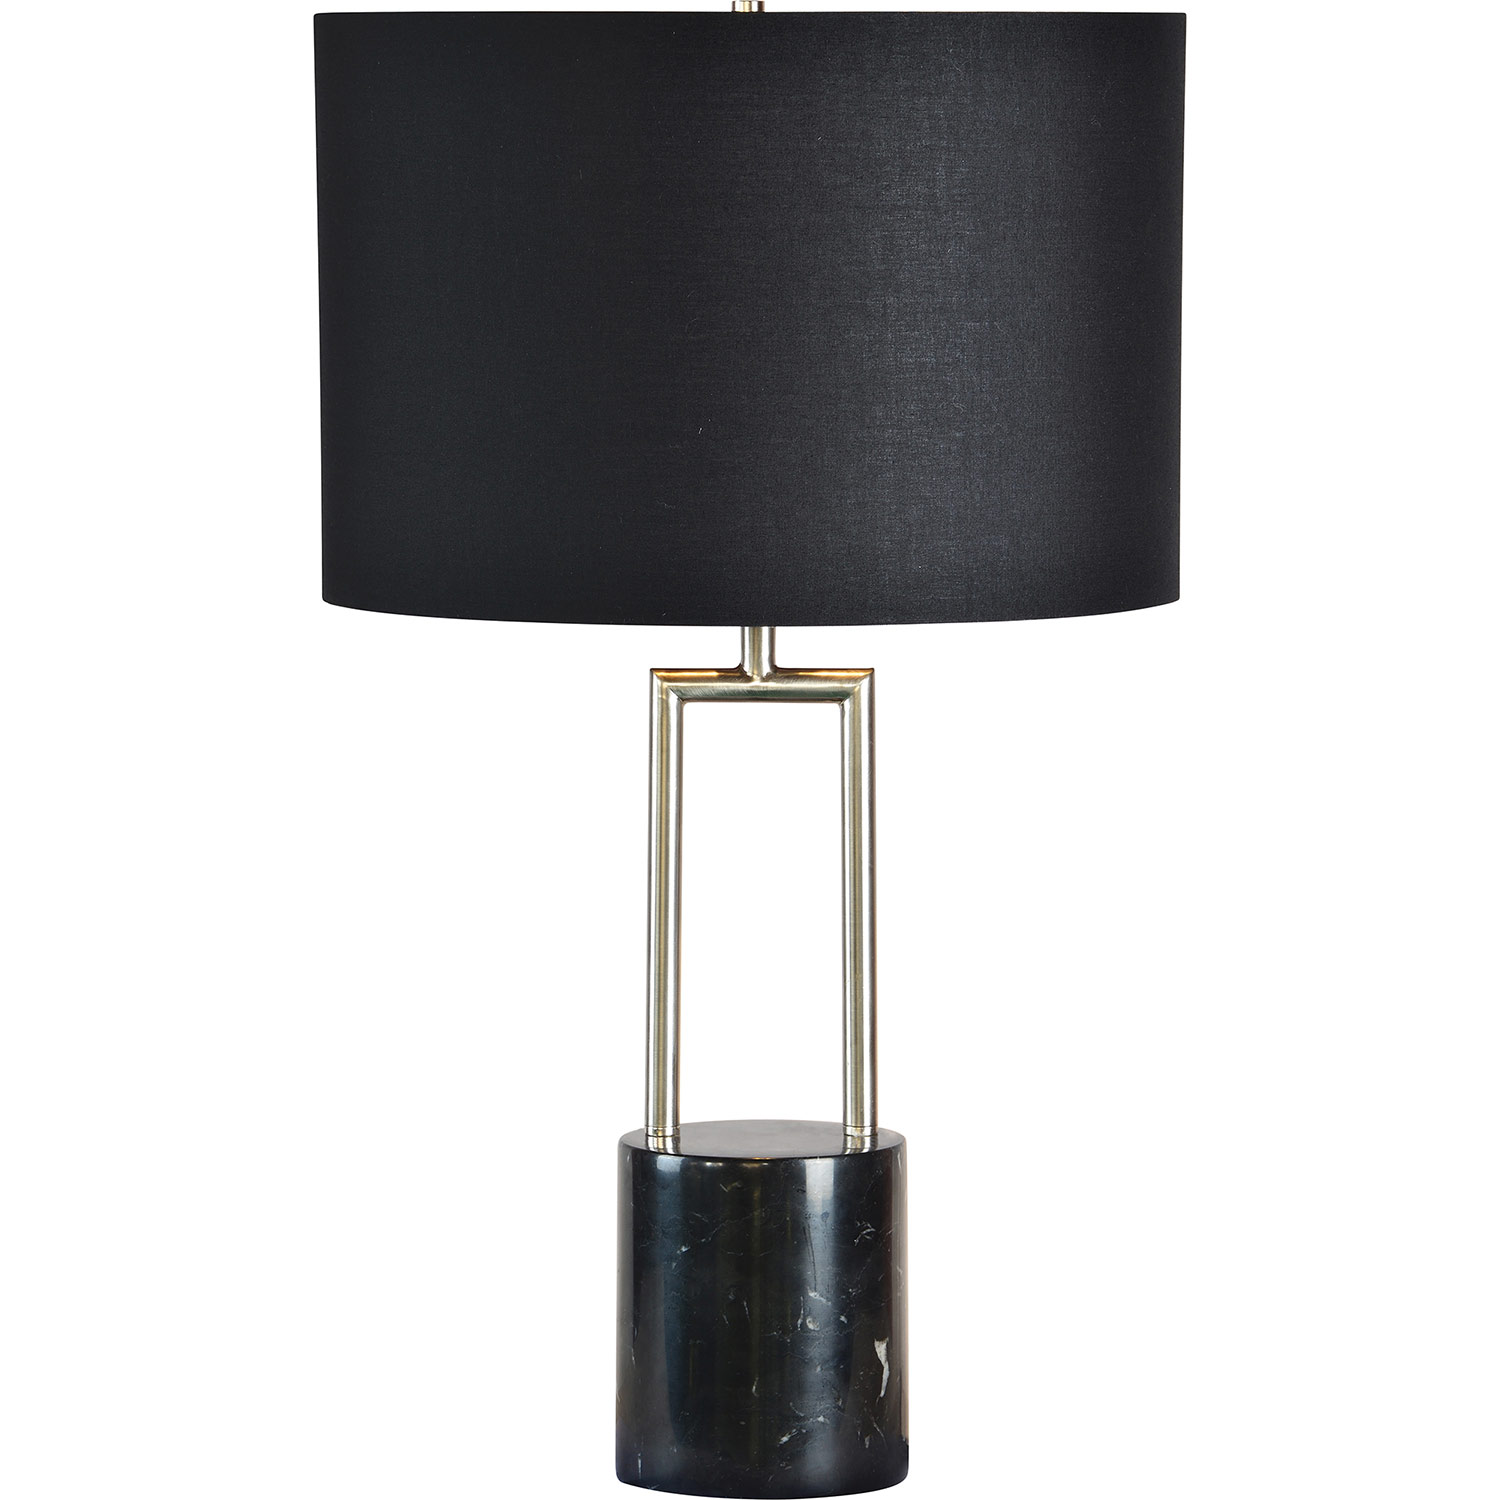 Ren-Wil Chartwell Table Lamp - Black Marble